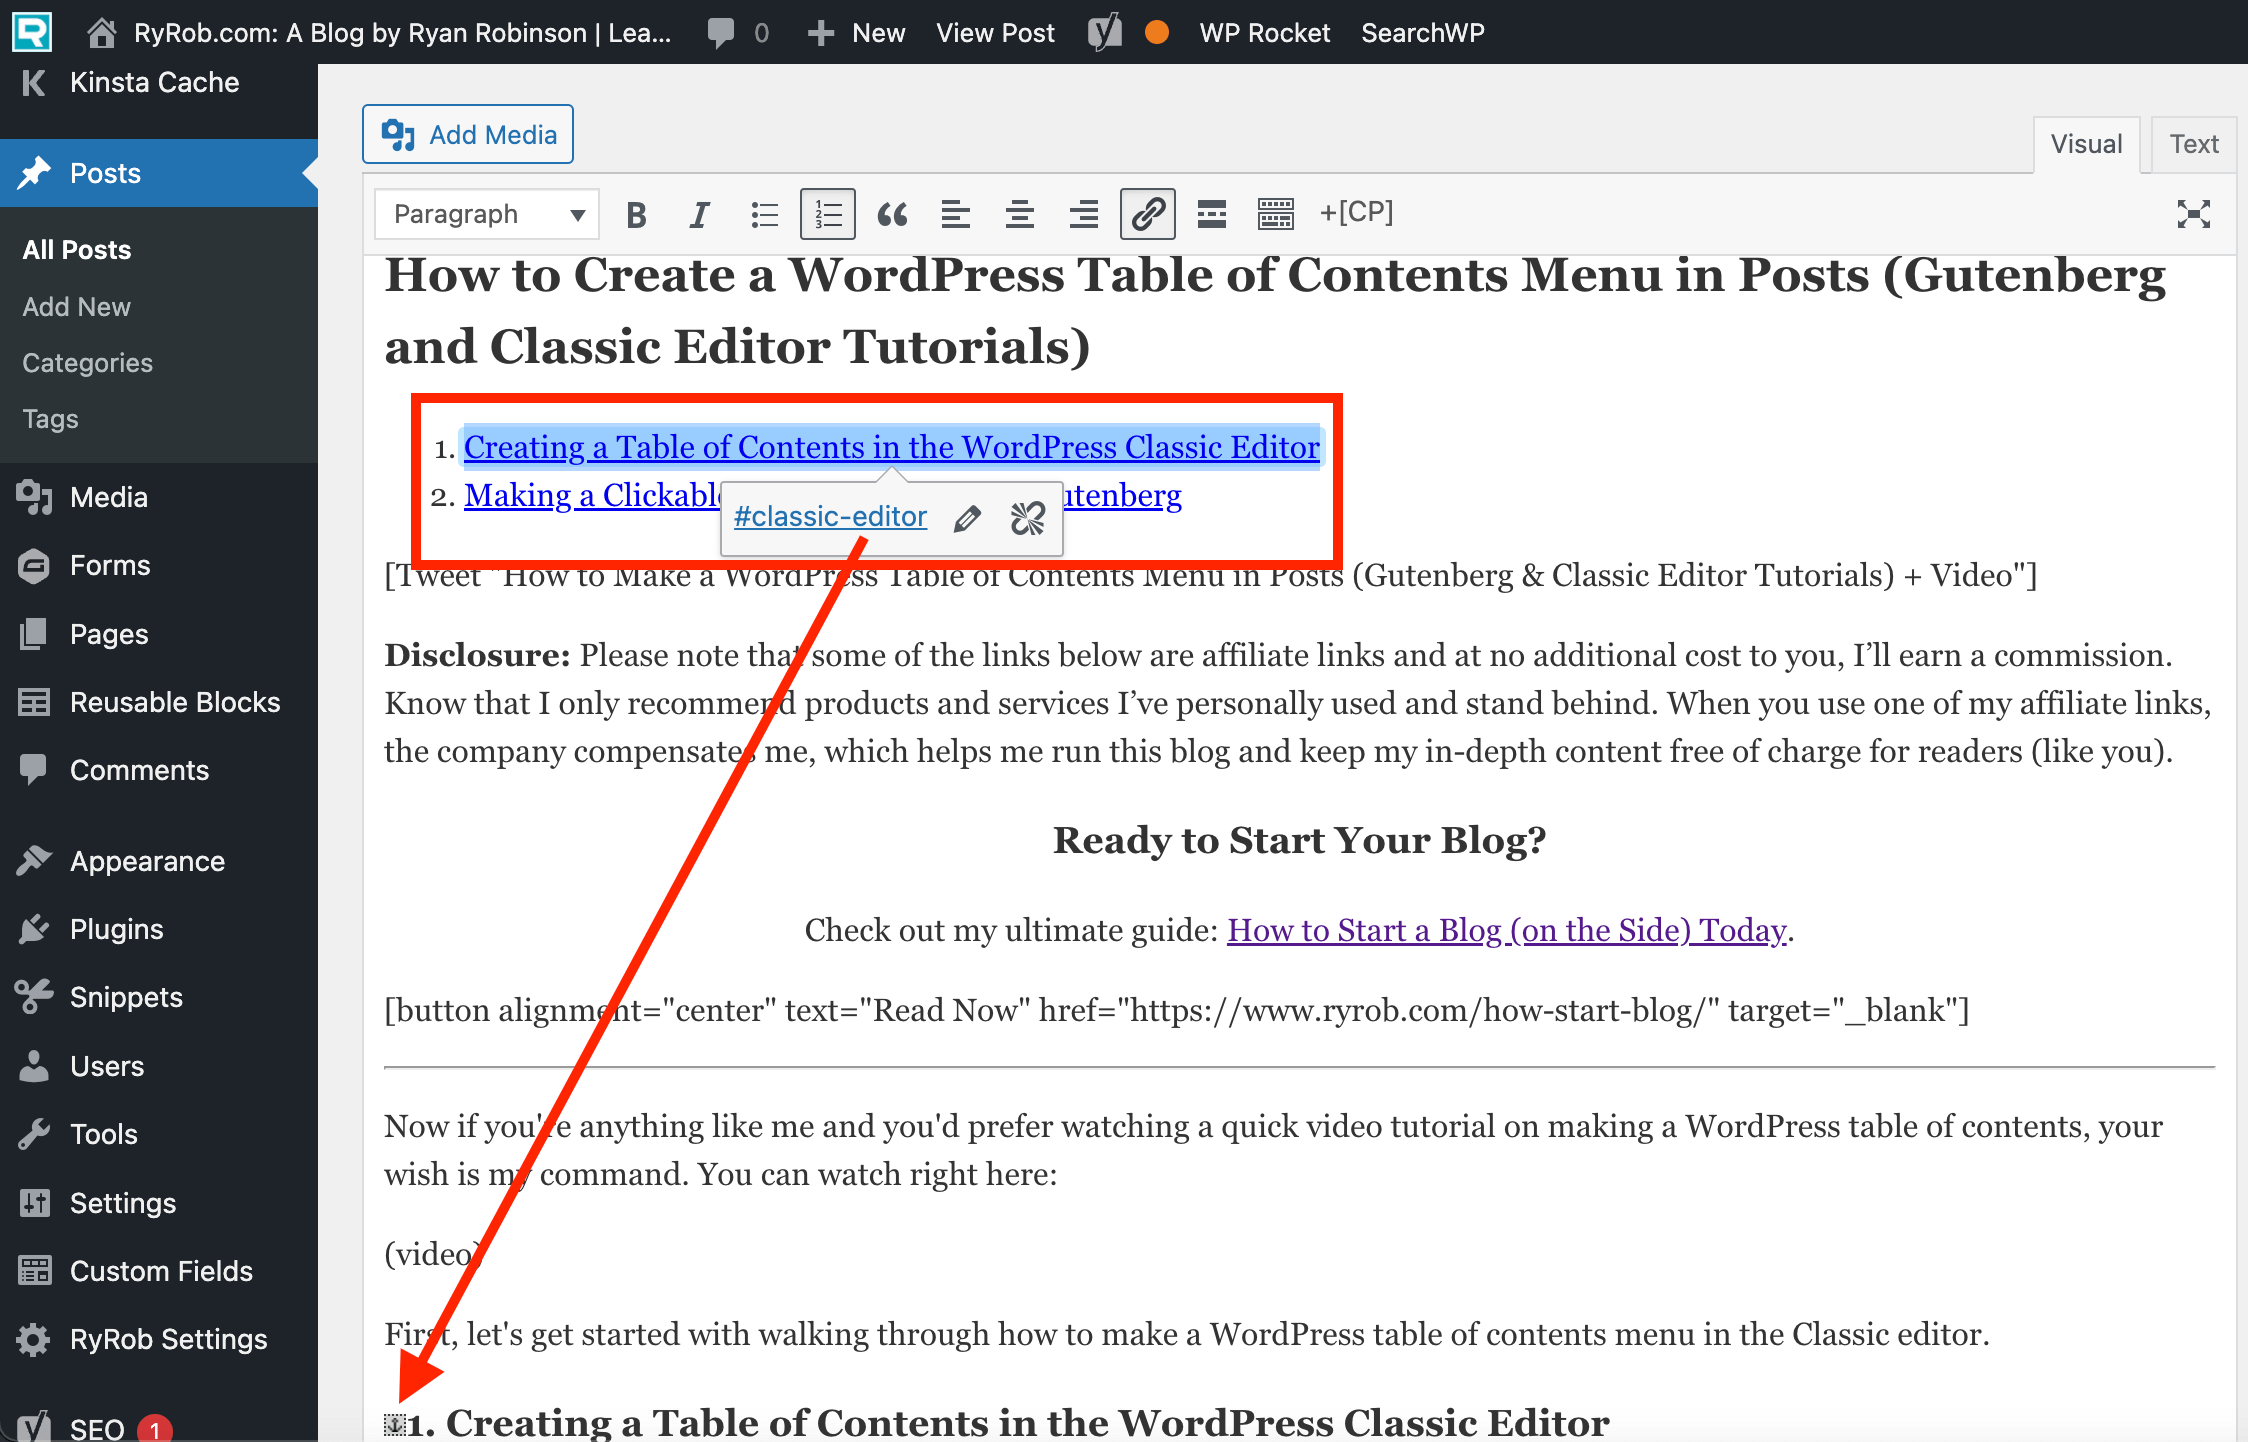 How to Create a WordPress Table of Contents Menu in Posts (Classic Editor) Screenshot Tutorial in Action